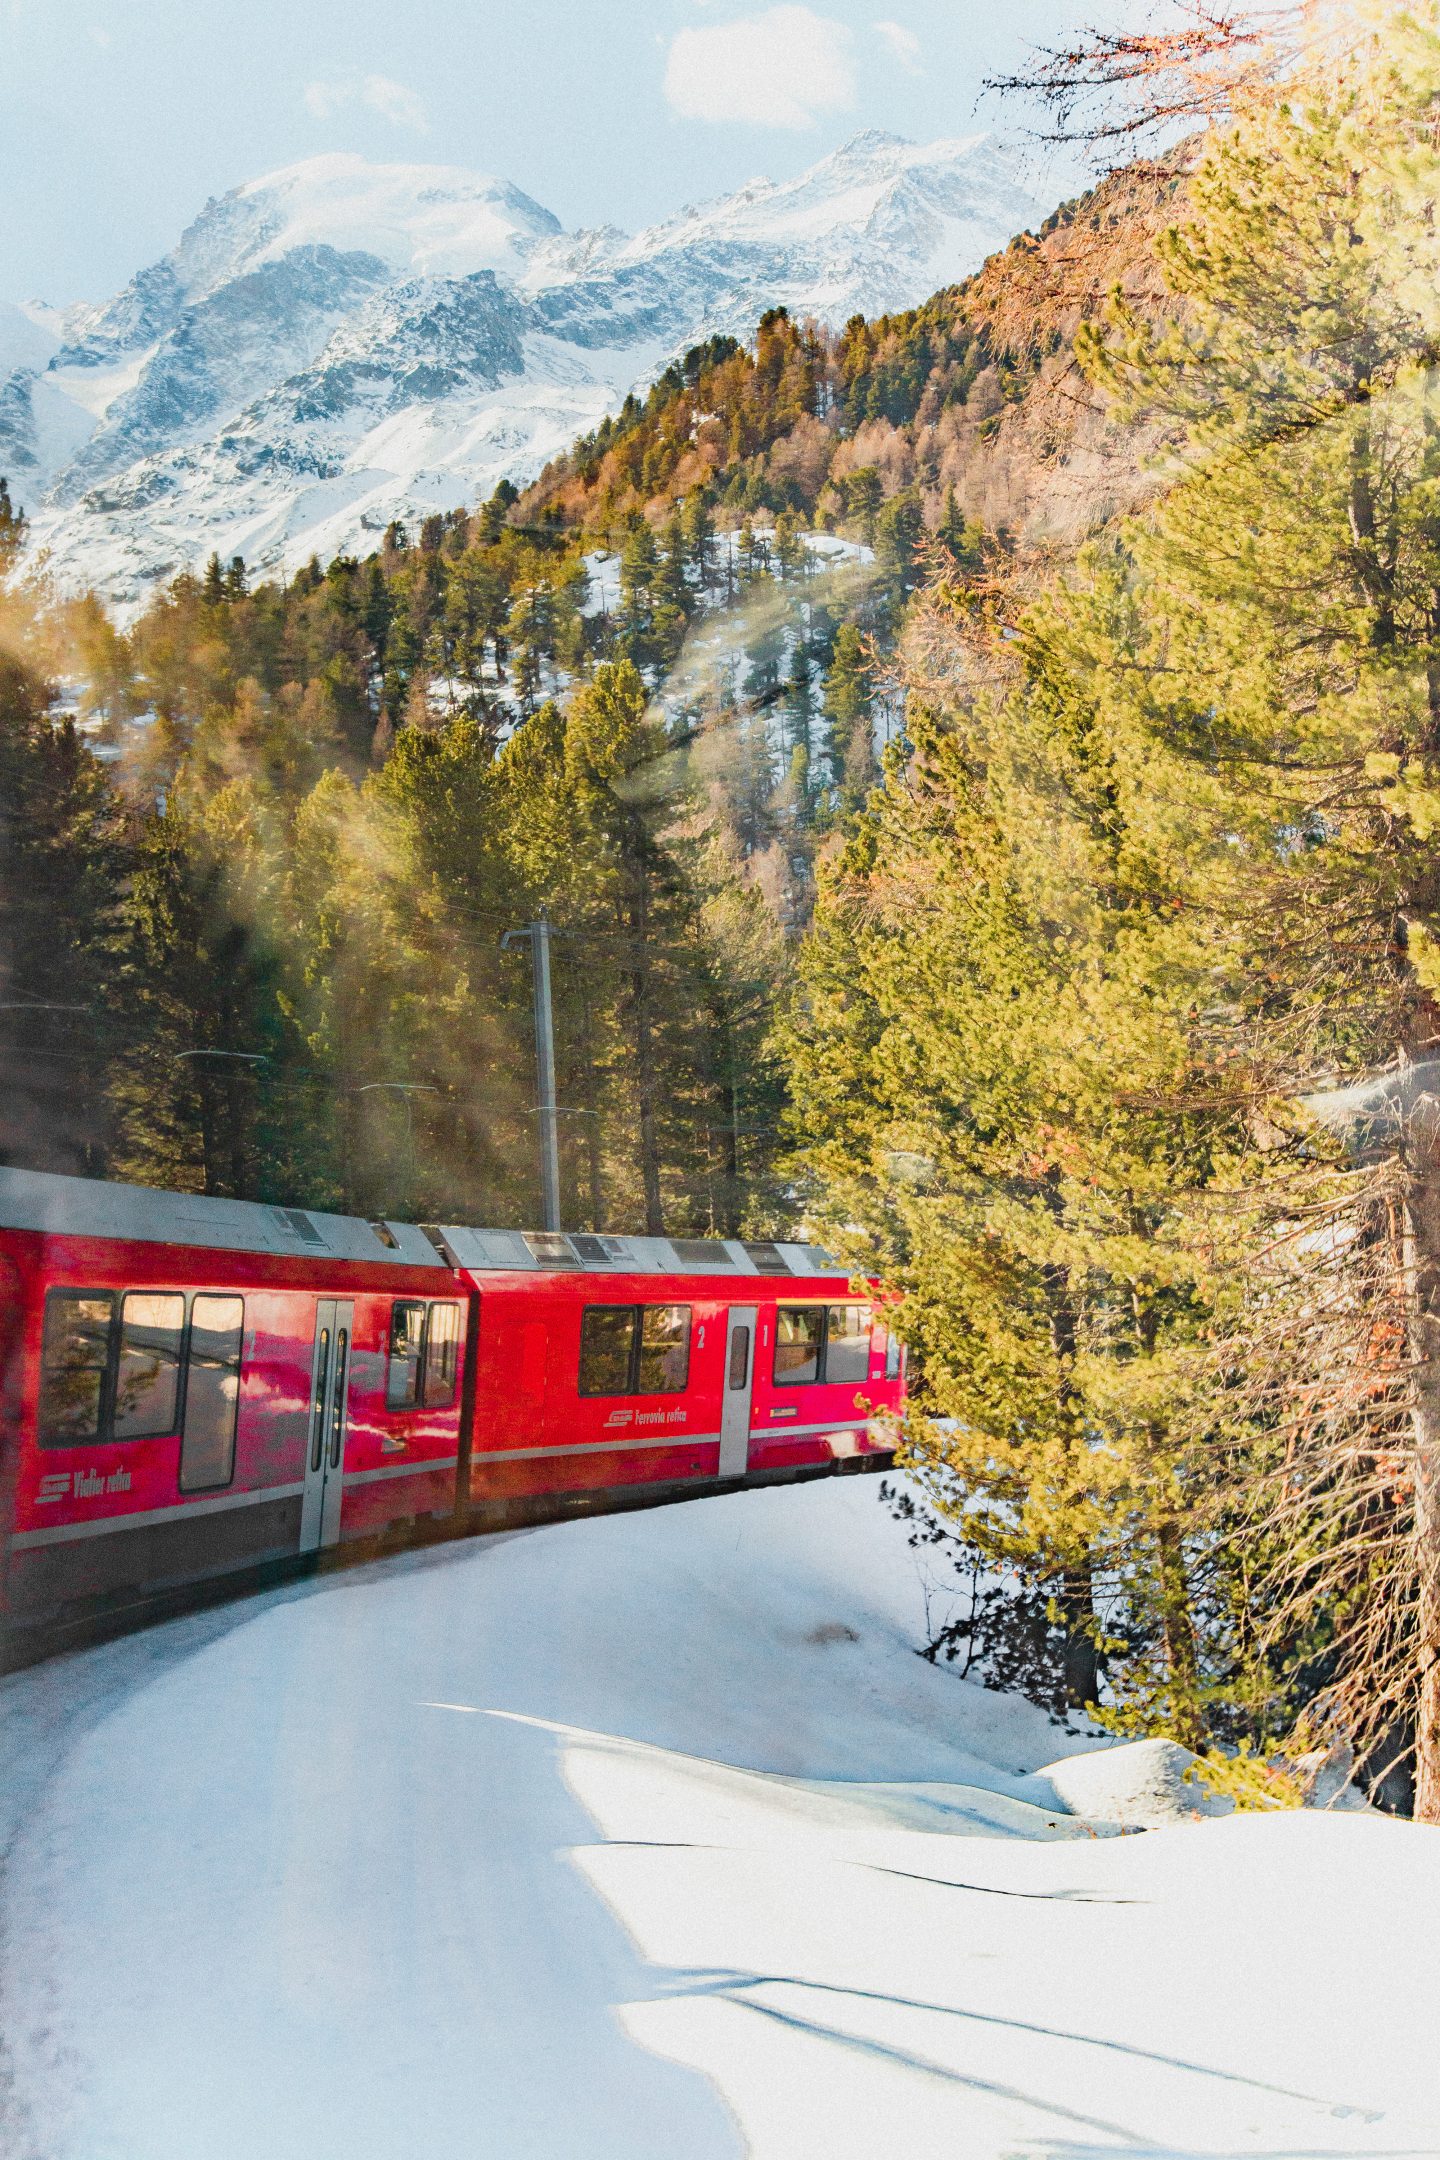 The Truth About The Bernina Express: How To Enjoy Switzerland’s Famous Red Train